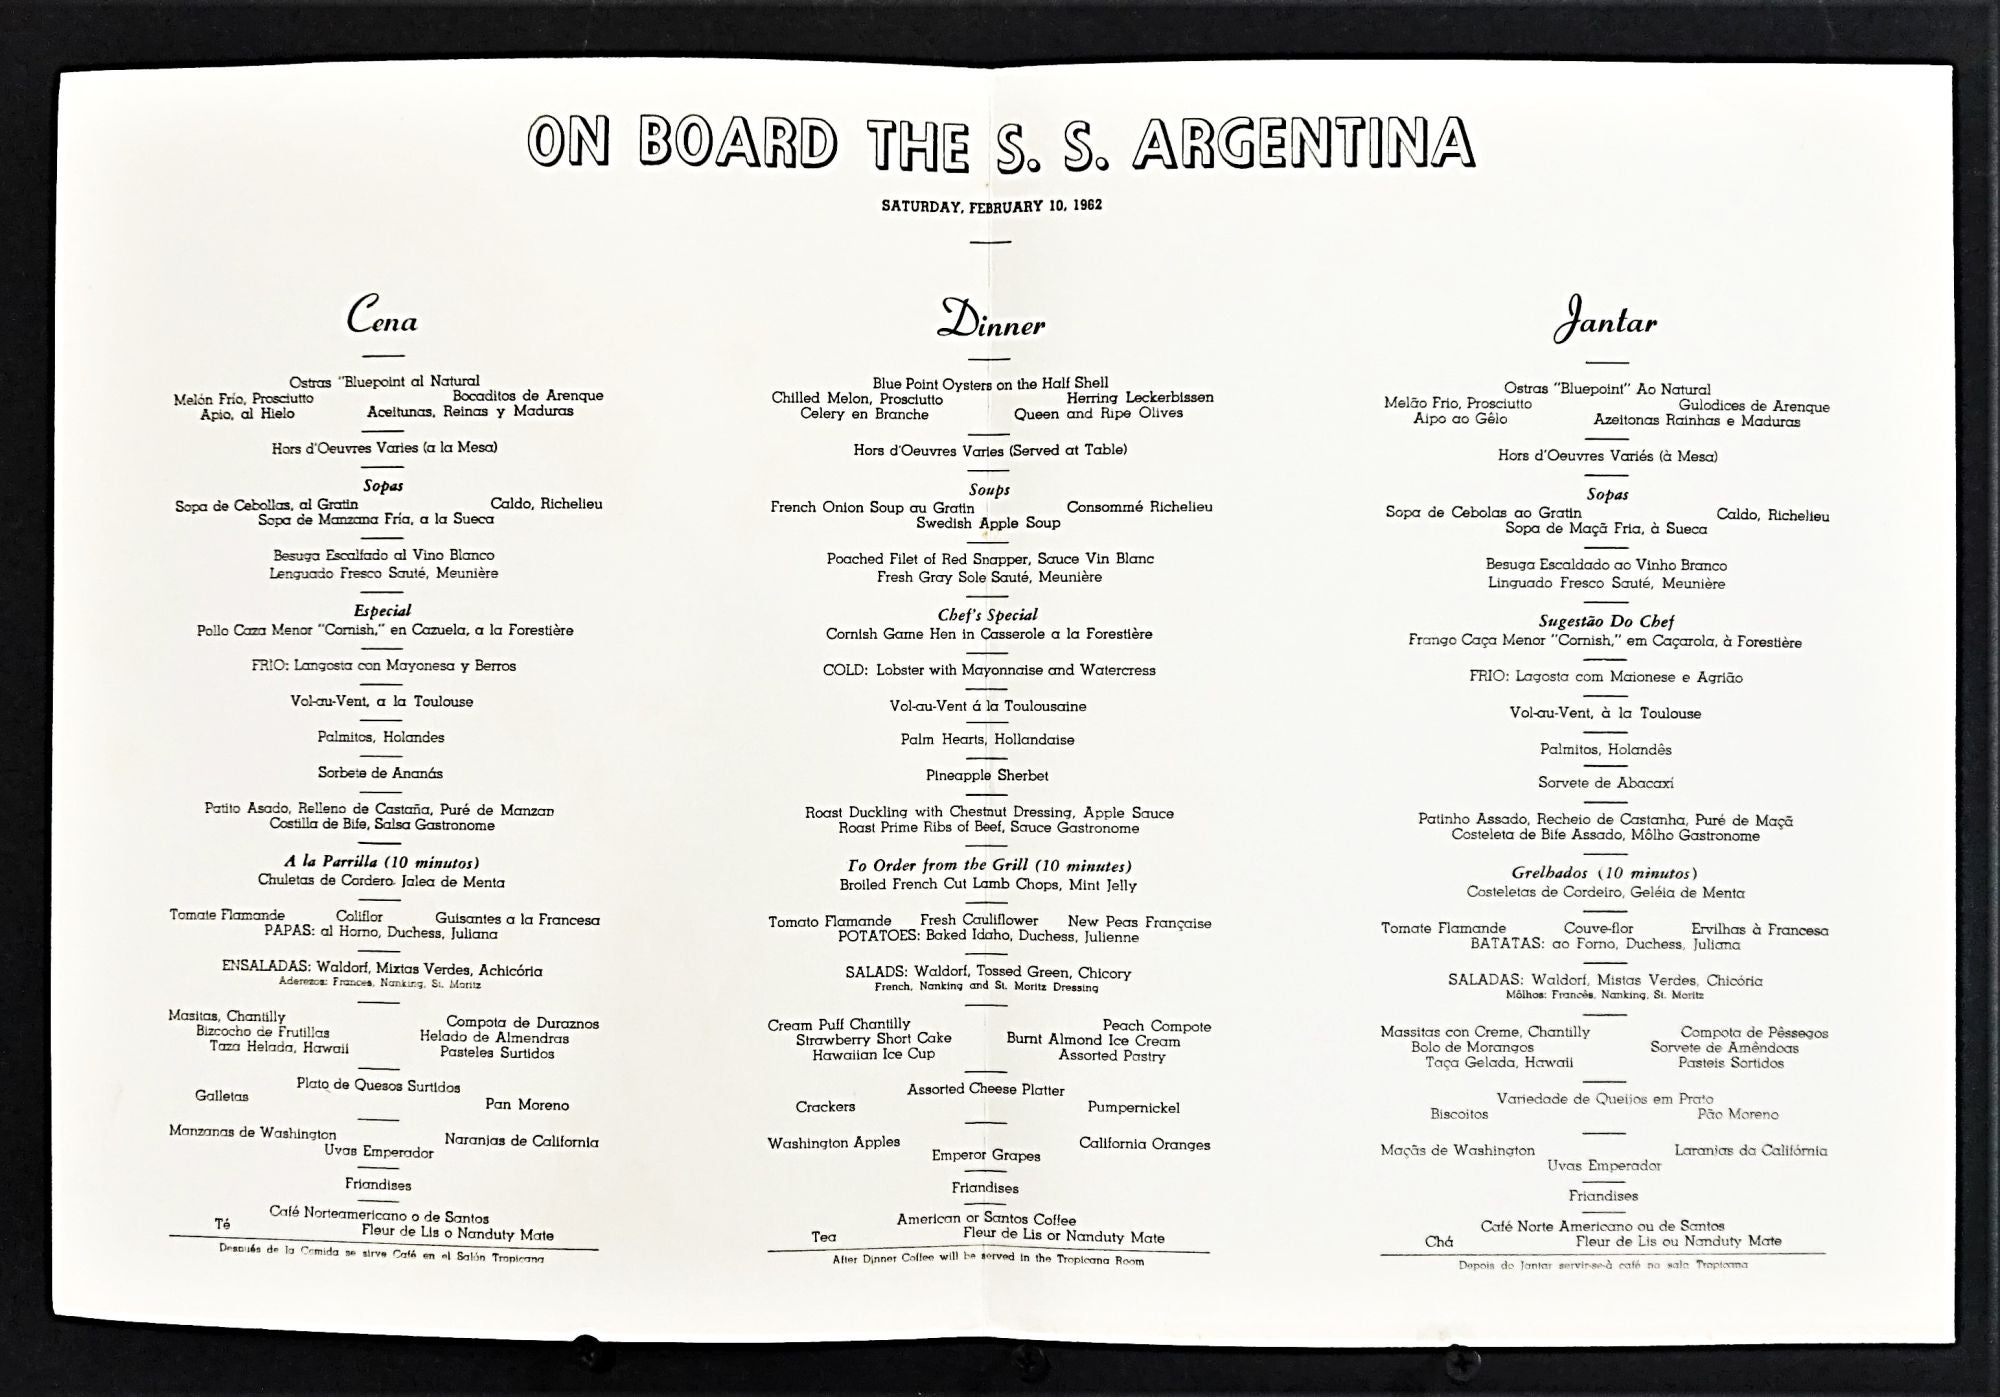 Bahia Brasil 'Food Vendor' by Ada Peacock. Cruise Menu - S. S. Argentina.  Saturday, February 10, 1962 by Moore-McCormack Lines on Blind Horse Books